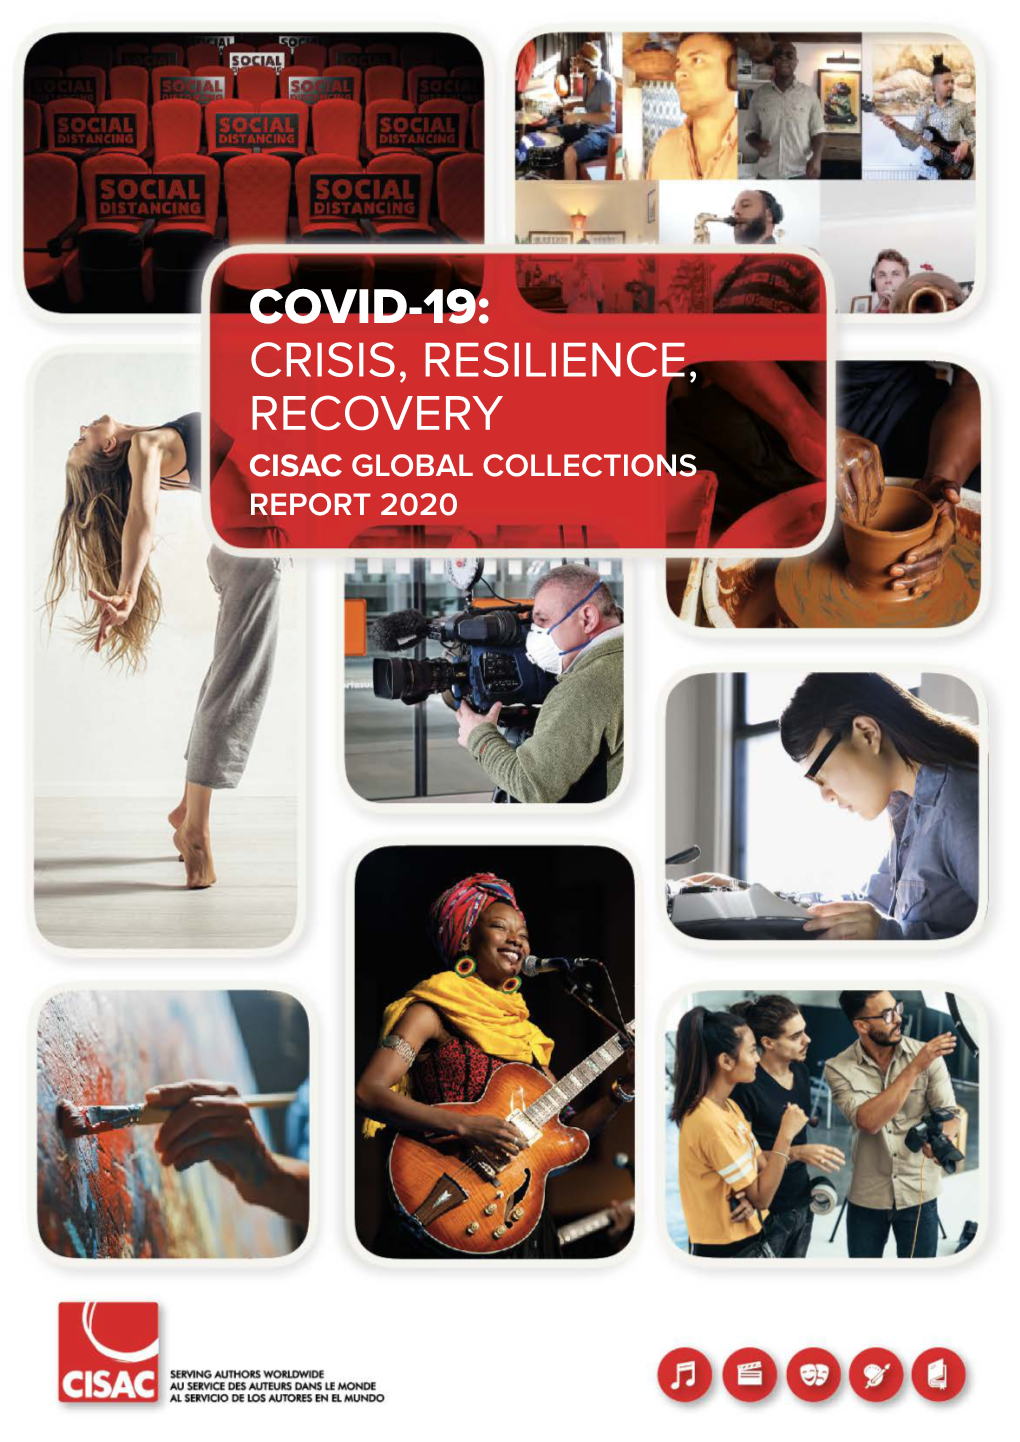 Covid-19: Crisis, Resilience, Recovery Cisac Global Collections Report 2020